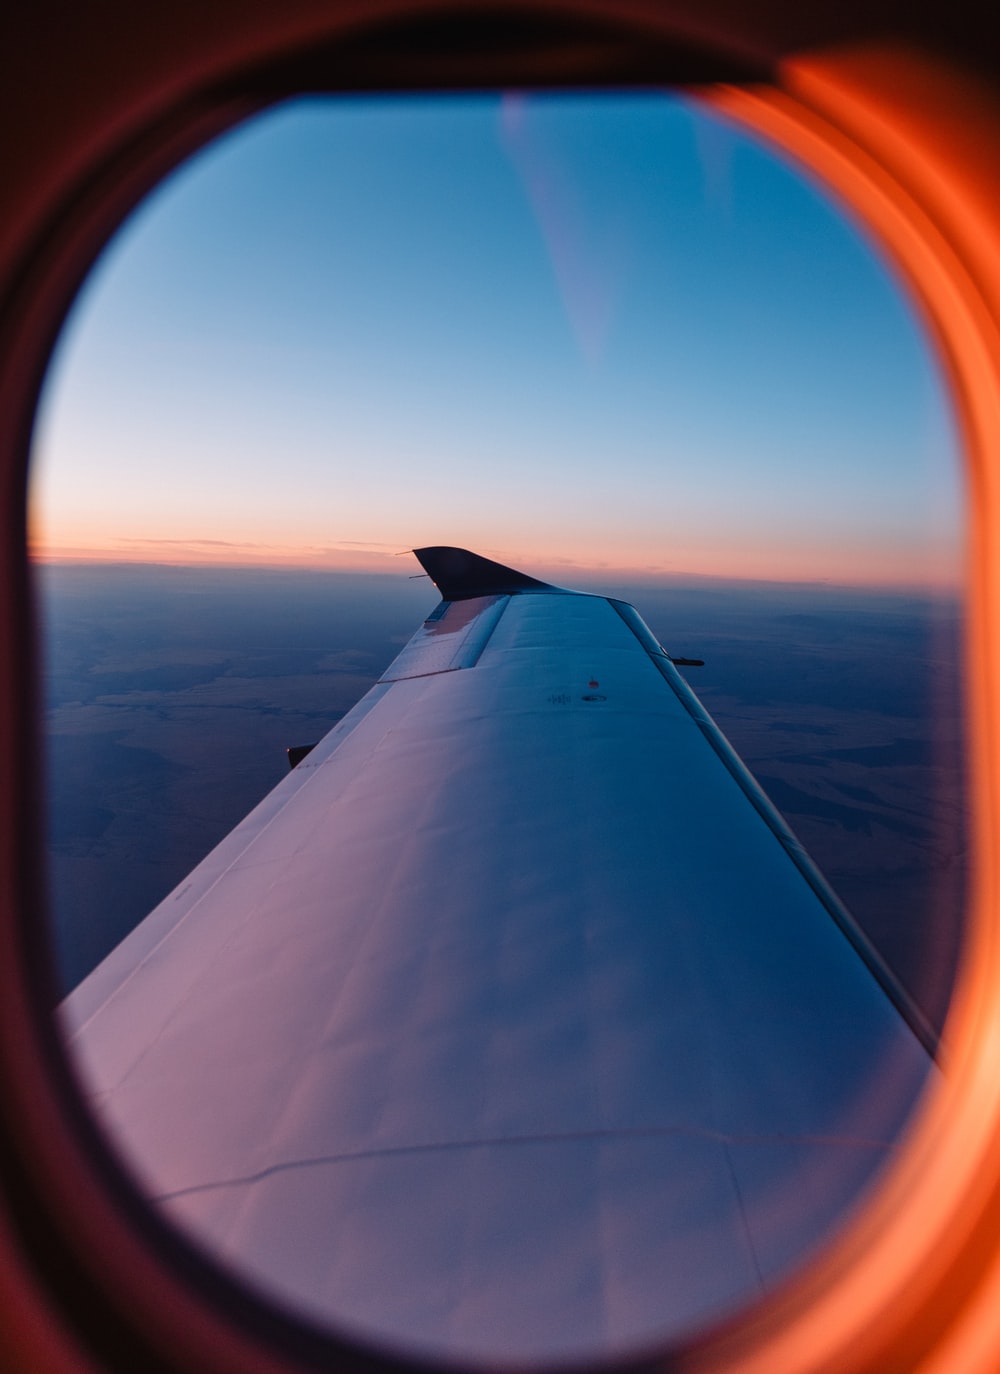 Plane Window Sunset Picture. Download Free Image